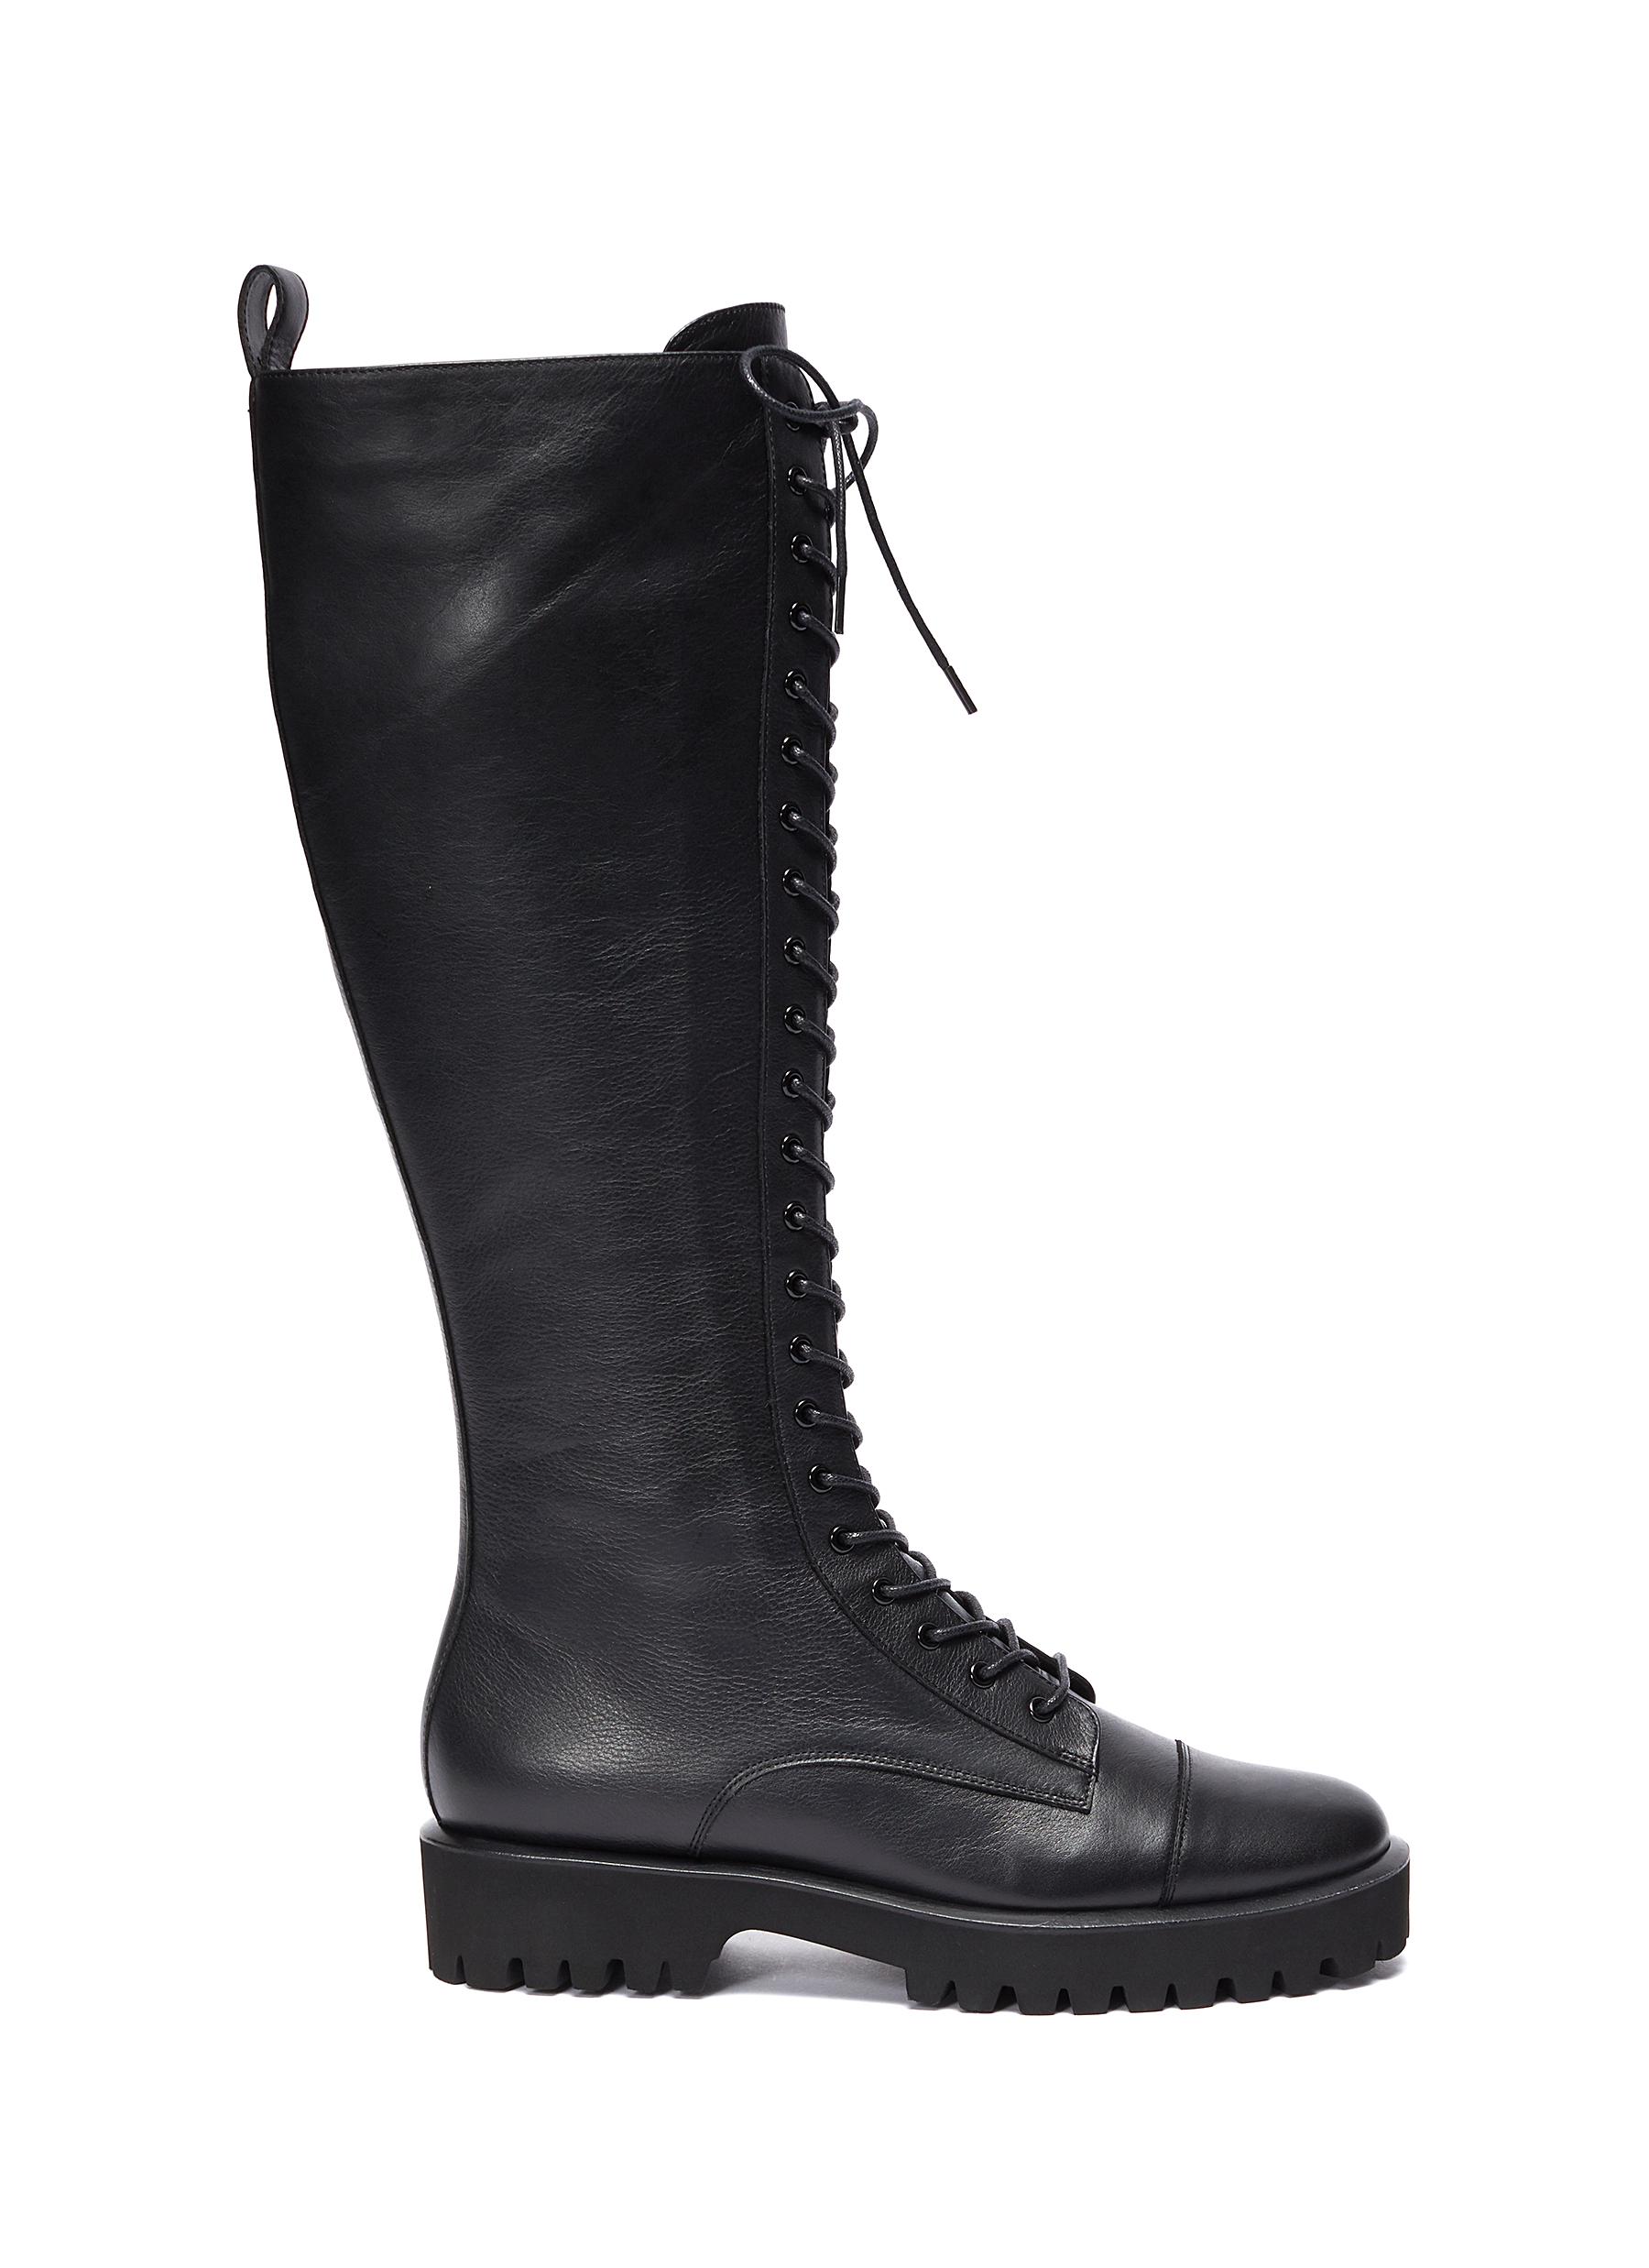 leather military boots womens